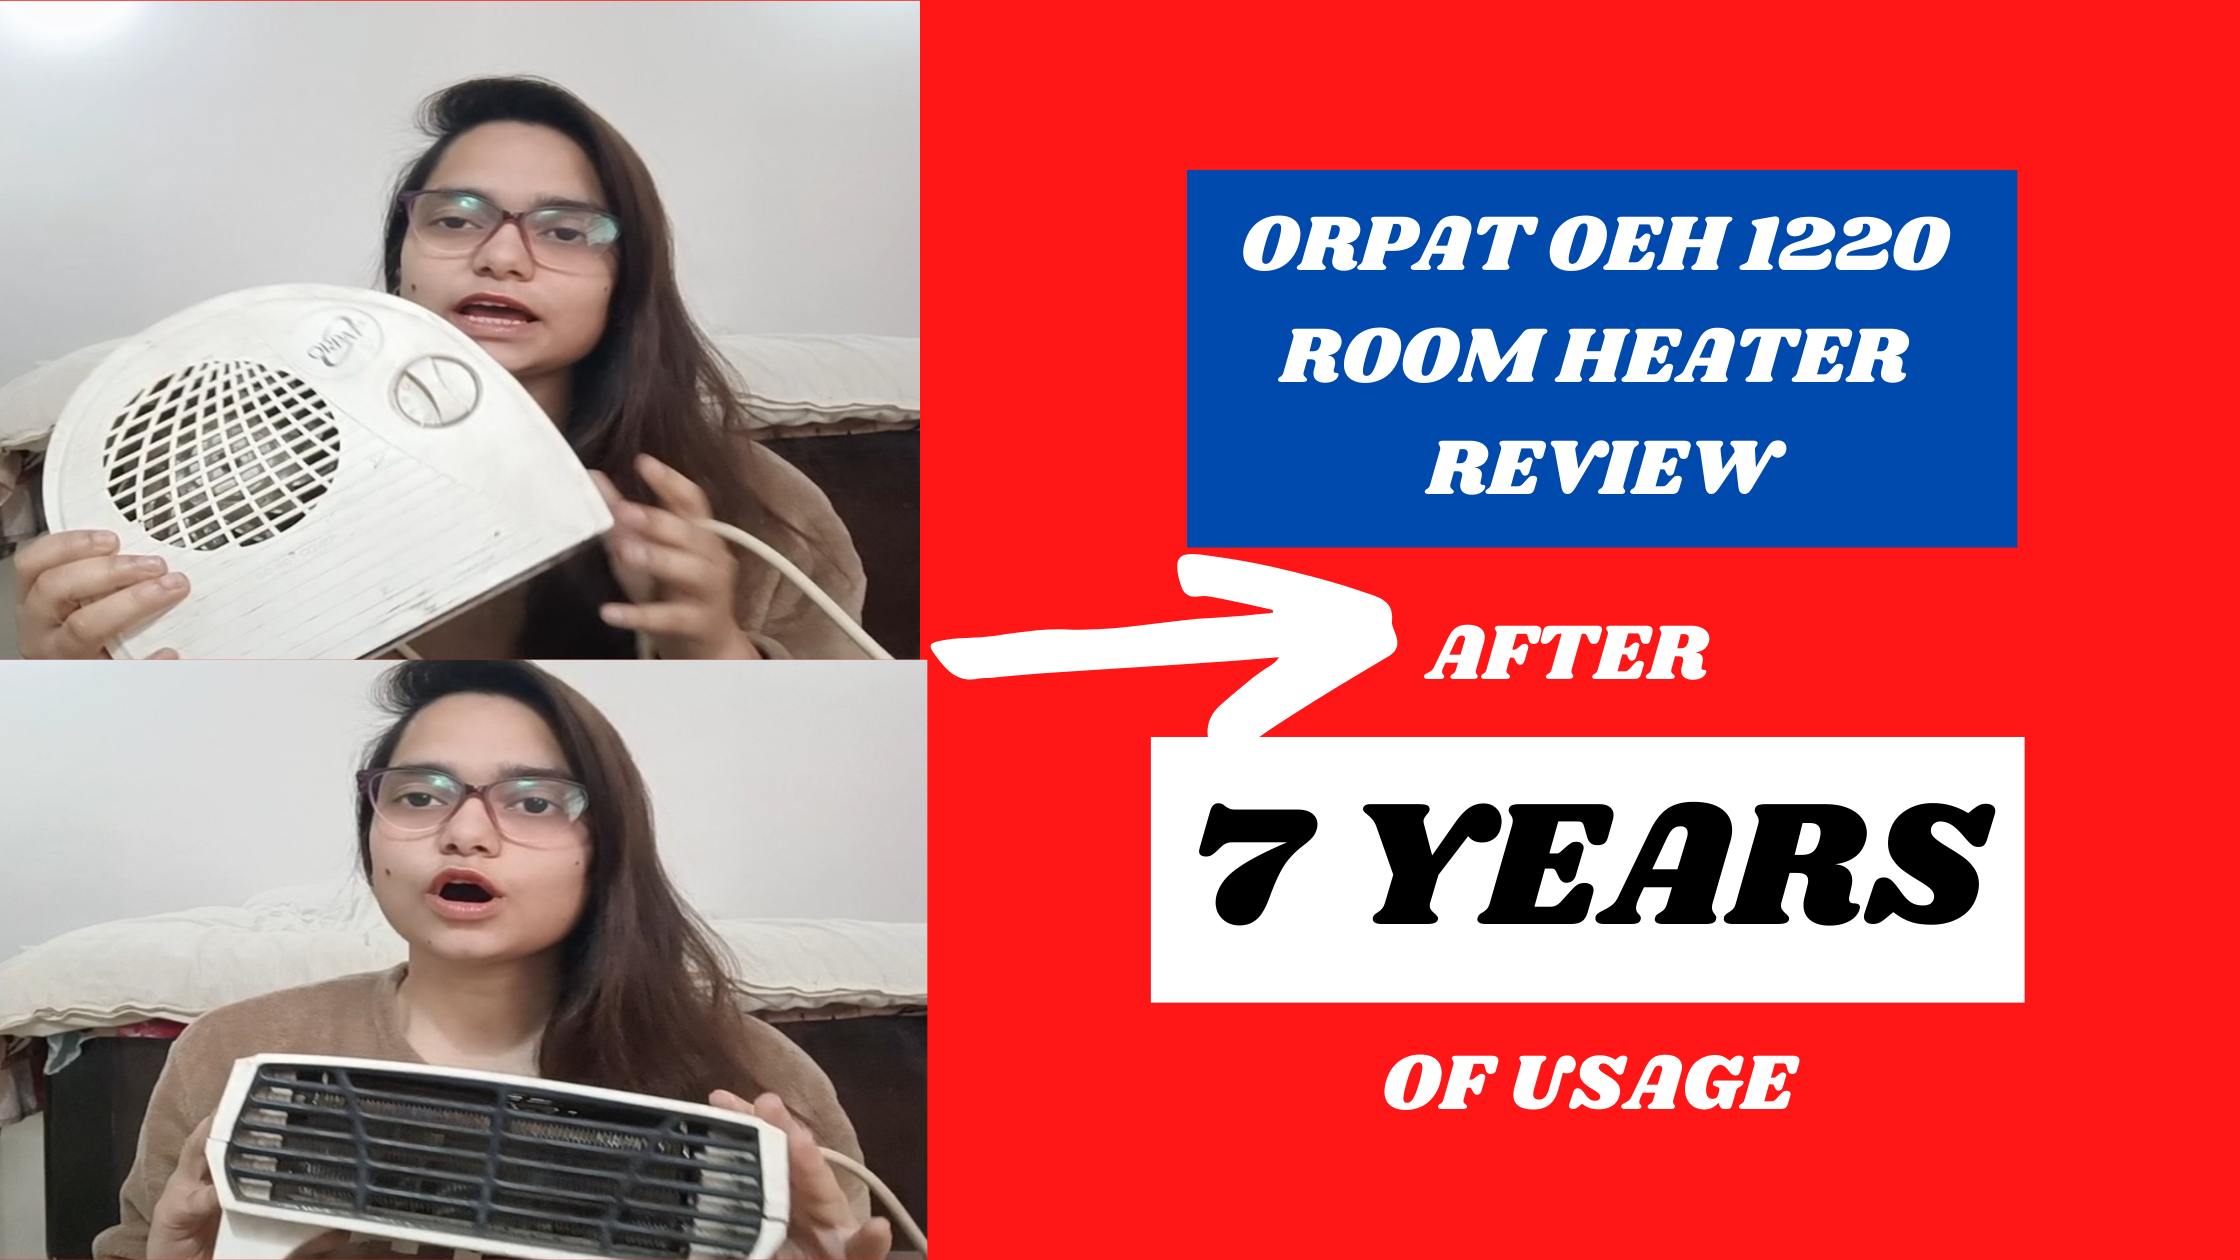 Orpat oeh 1220 room heater review